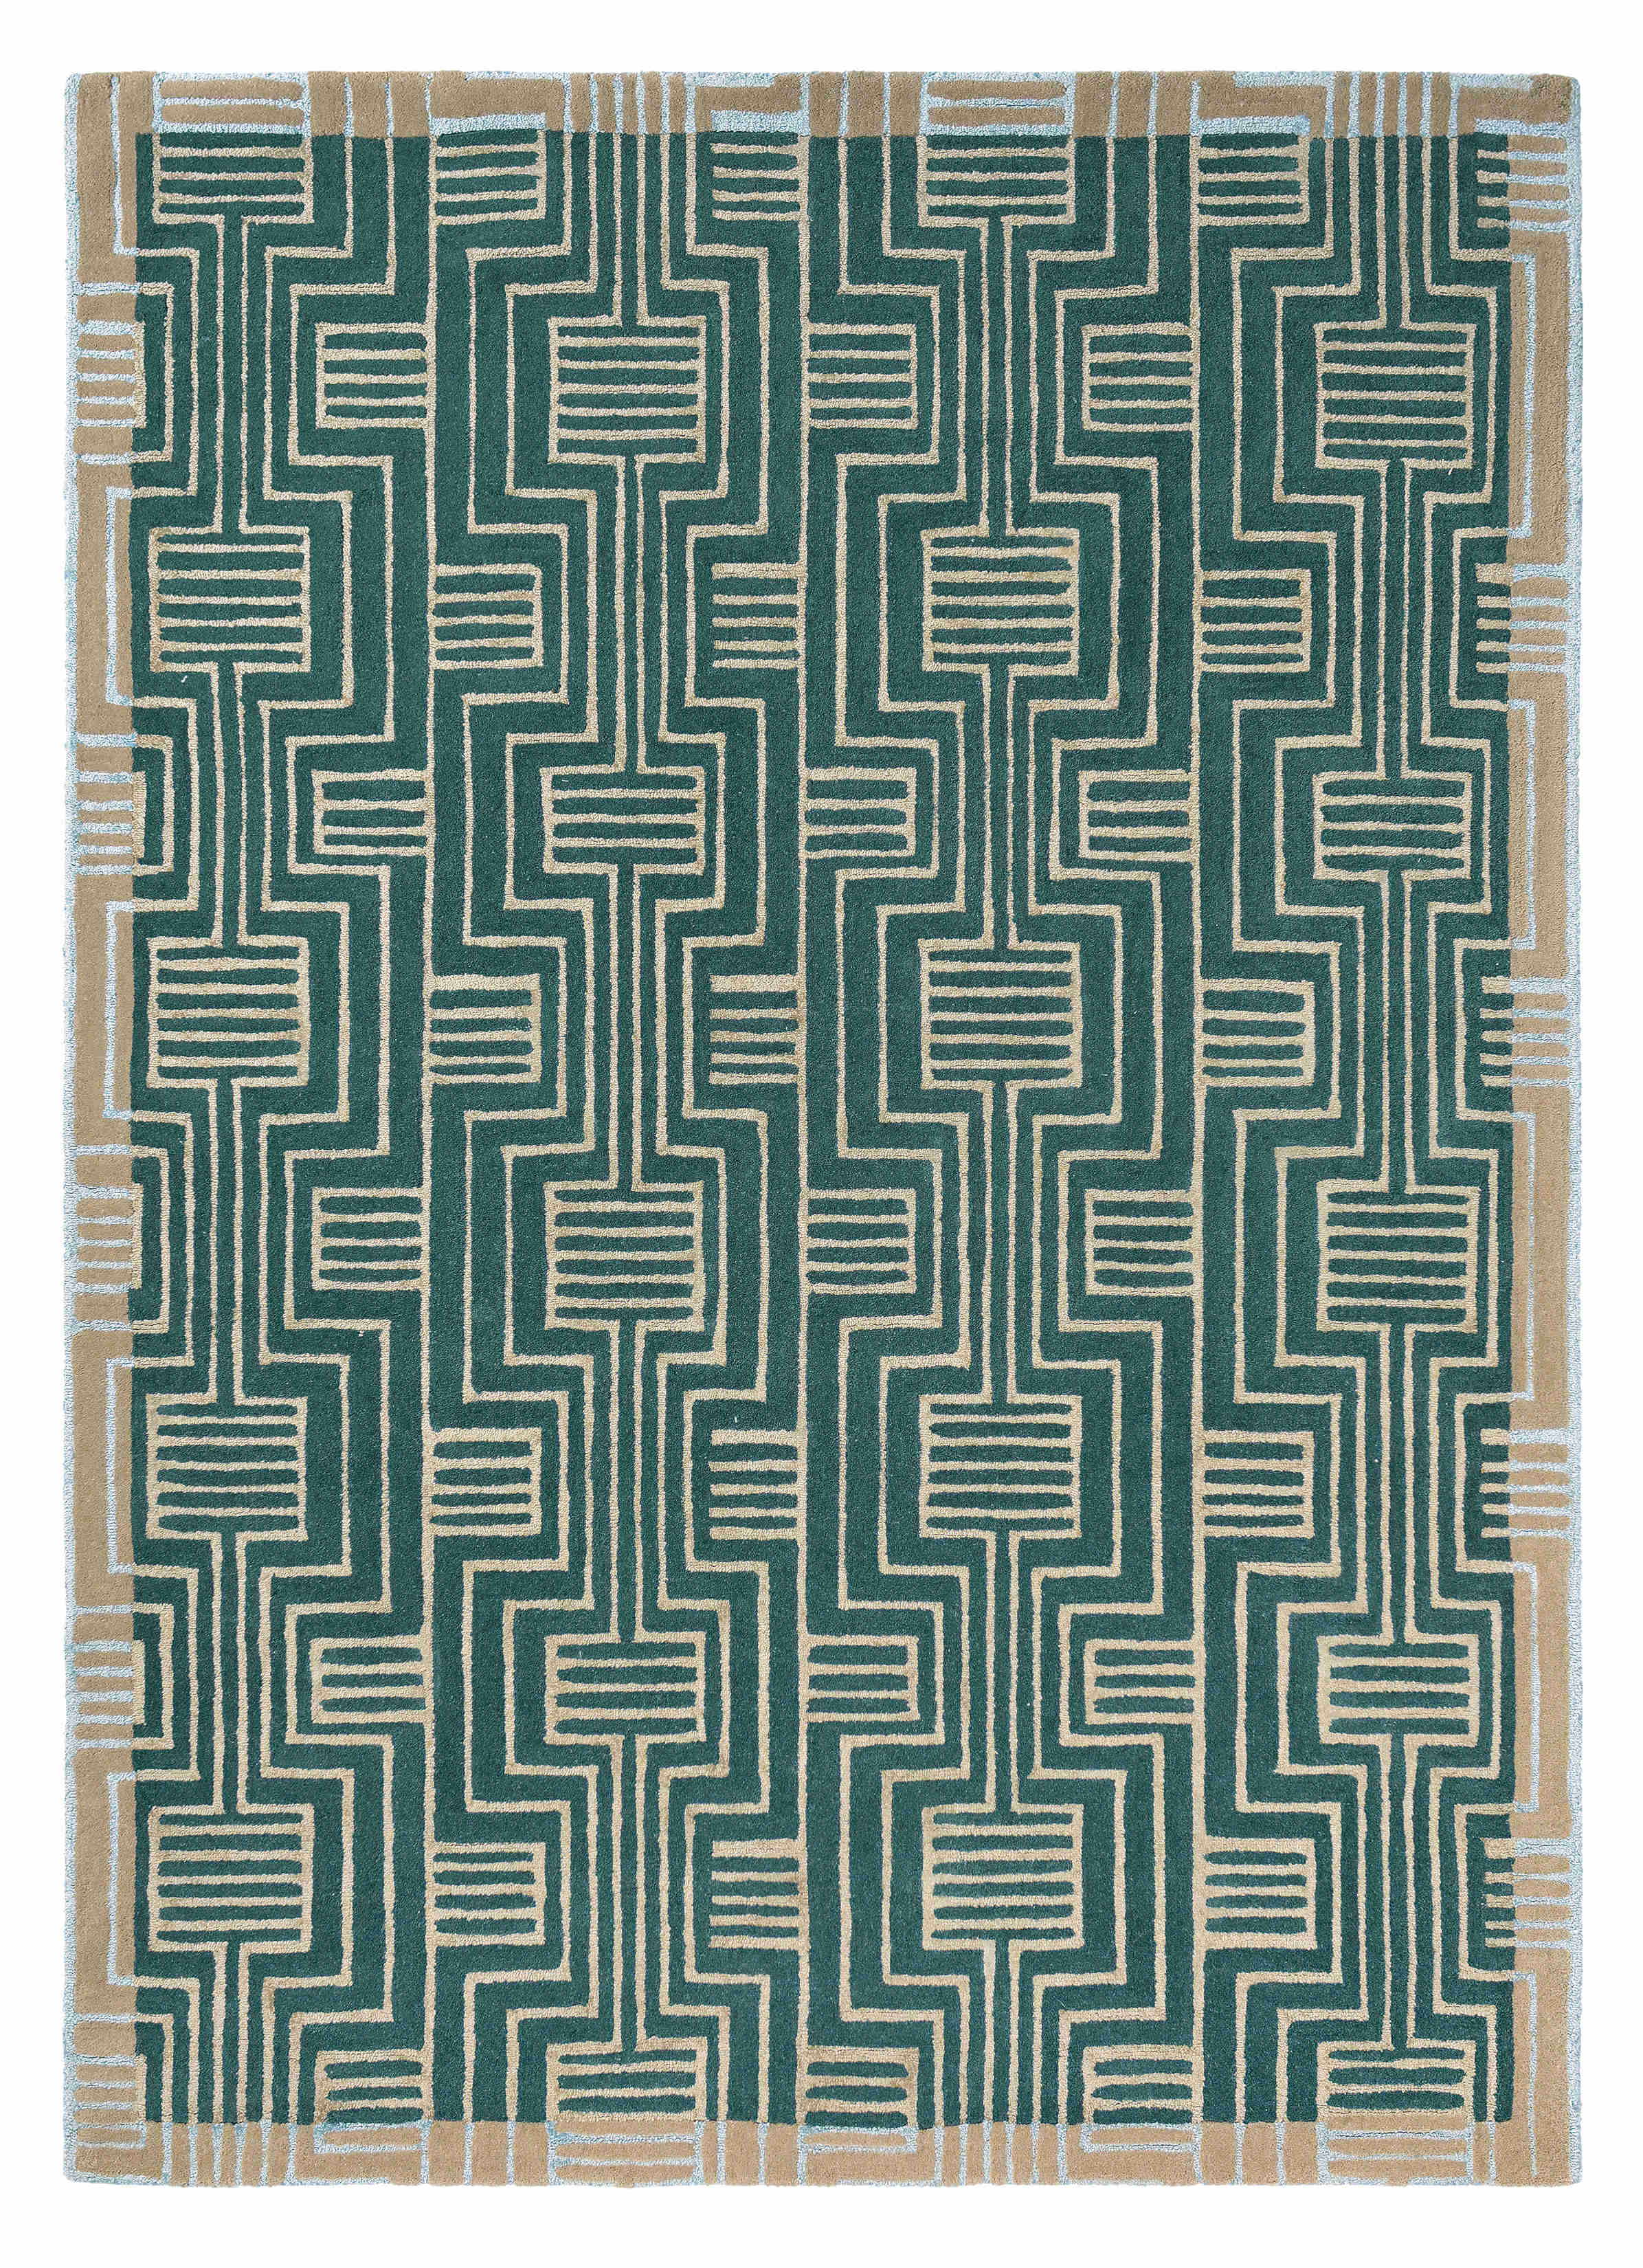 Rectangular green rug with beige border and grey art deco pattern